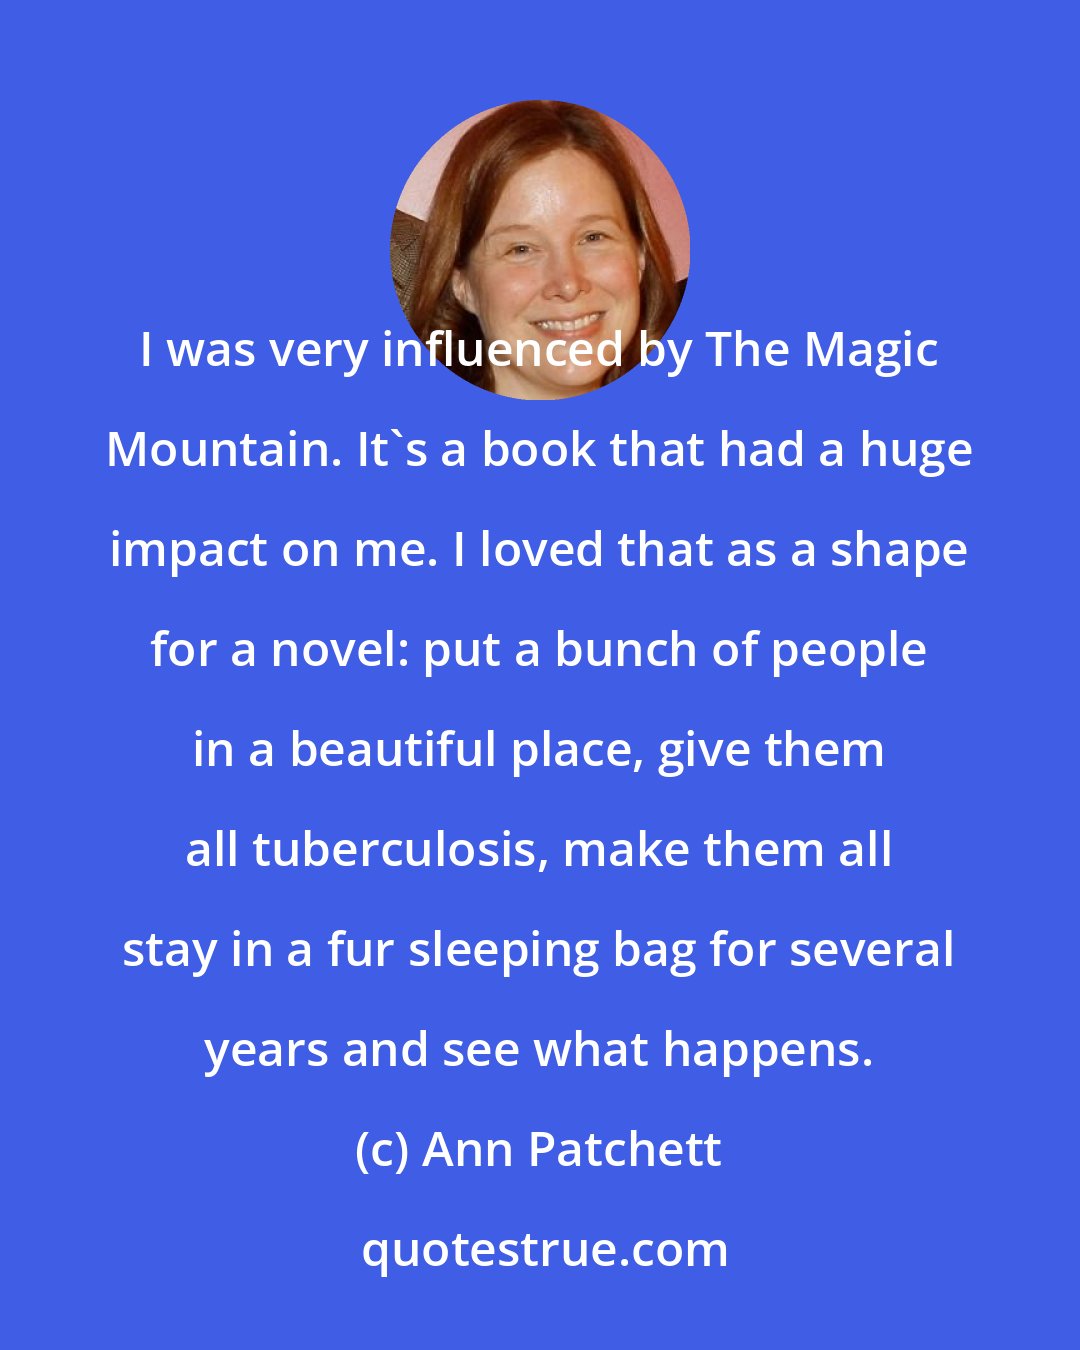 Ann Patchett: I was very influenced by The Magic Mountain. It's a book that had a huge impact on me. I loved that as a shape for a novel: put a bunch of people in a beautiful place, give them all tuberculosis, make them all stay in a fur sleeping bag for several years and see what happens.